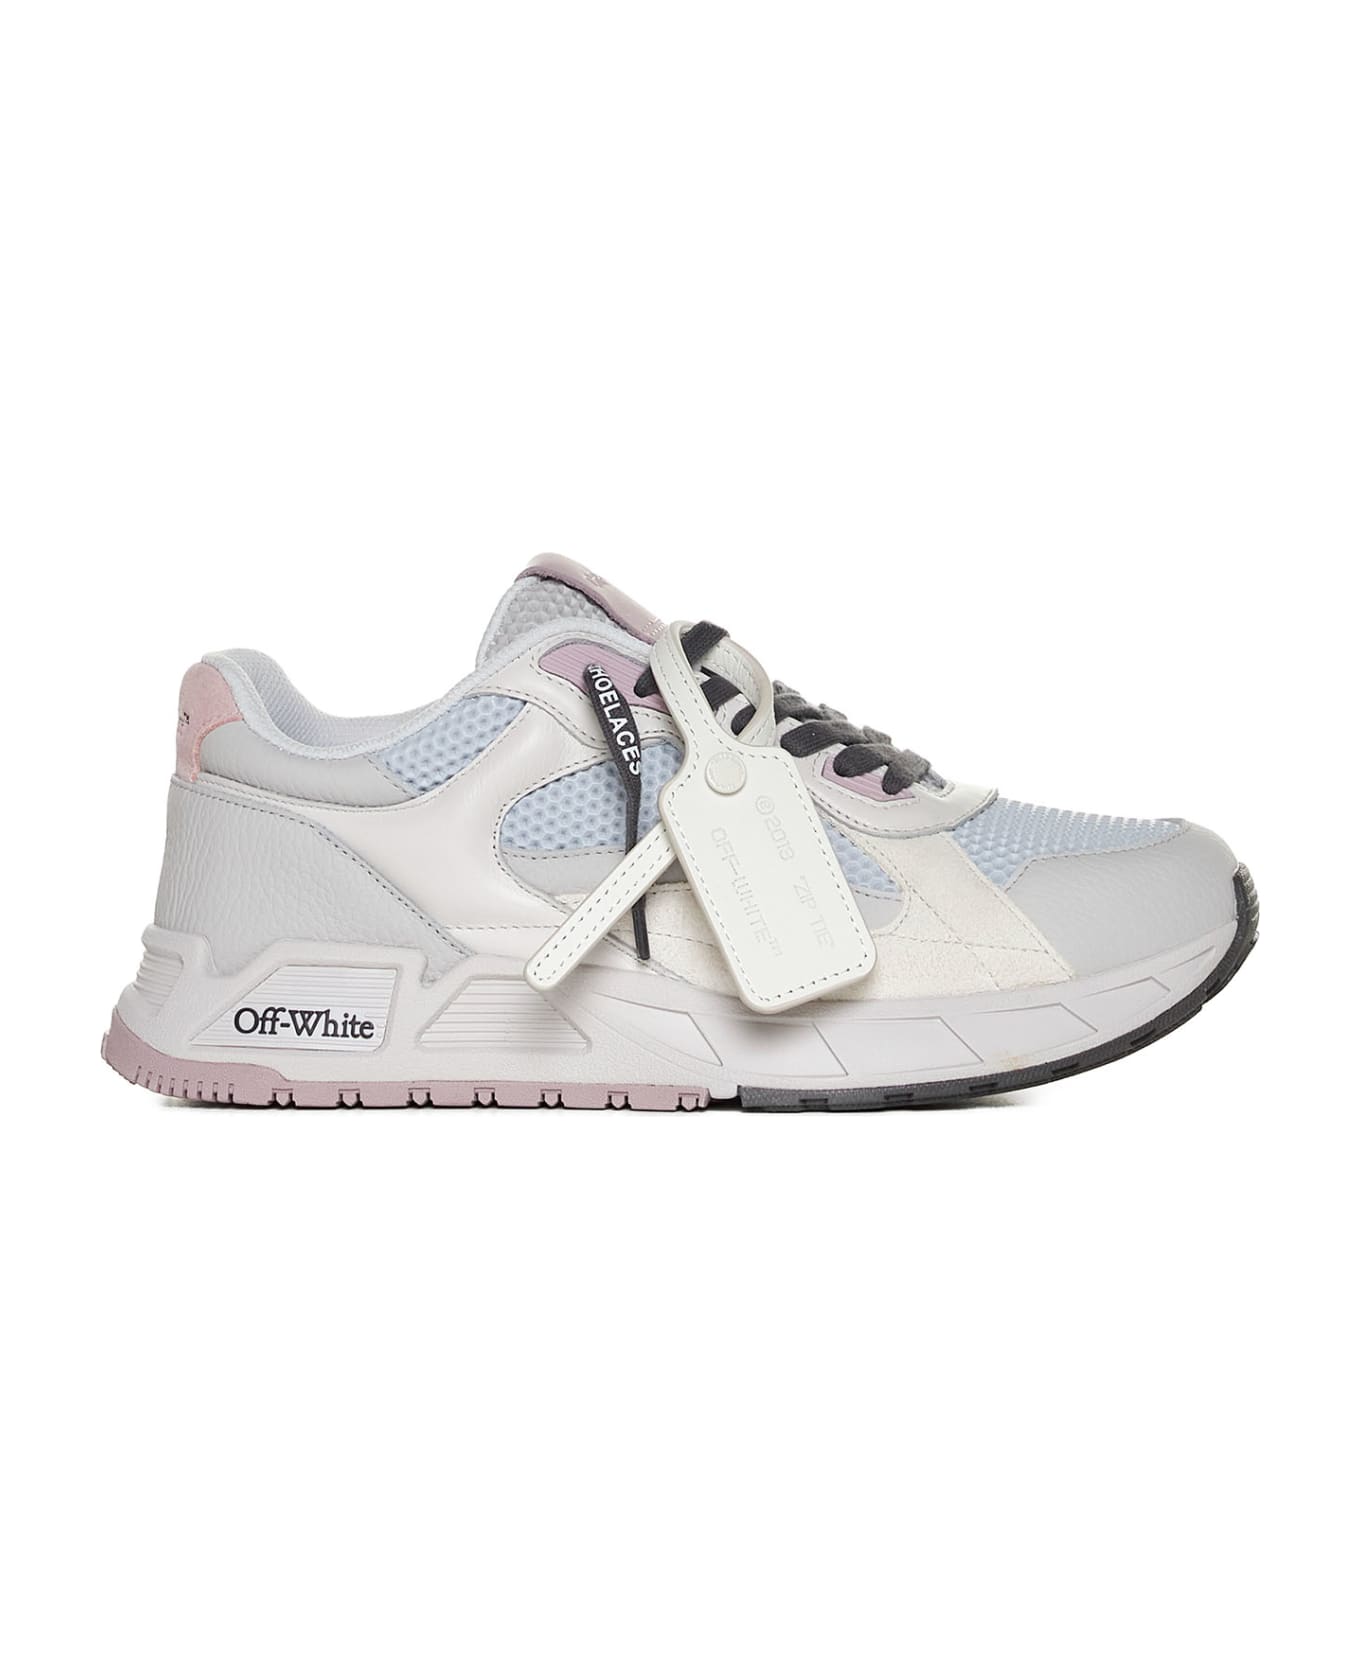 Off-White Sneakers - Off light blue lilac